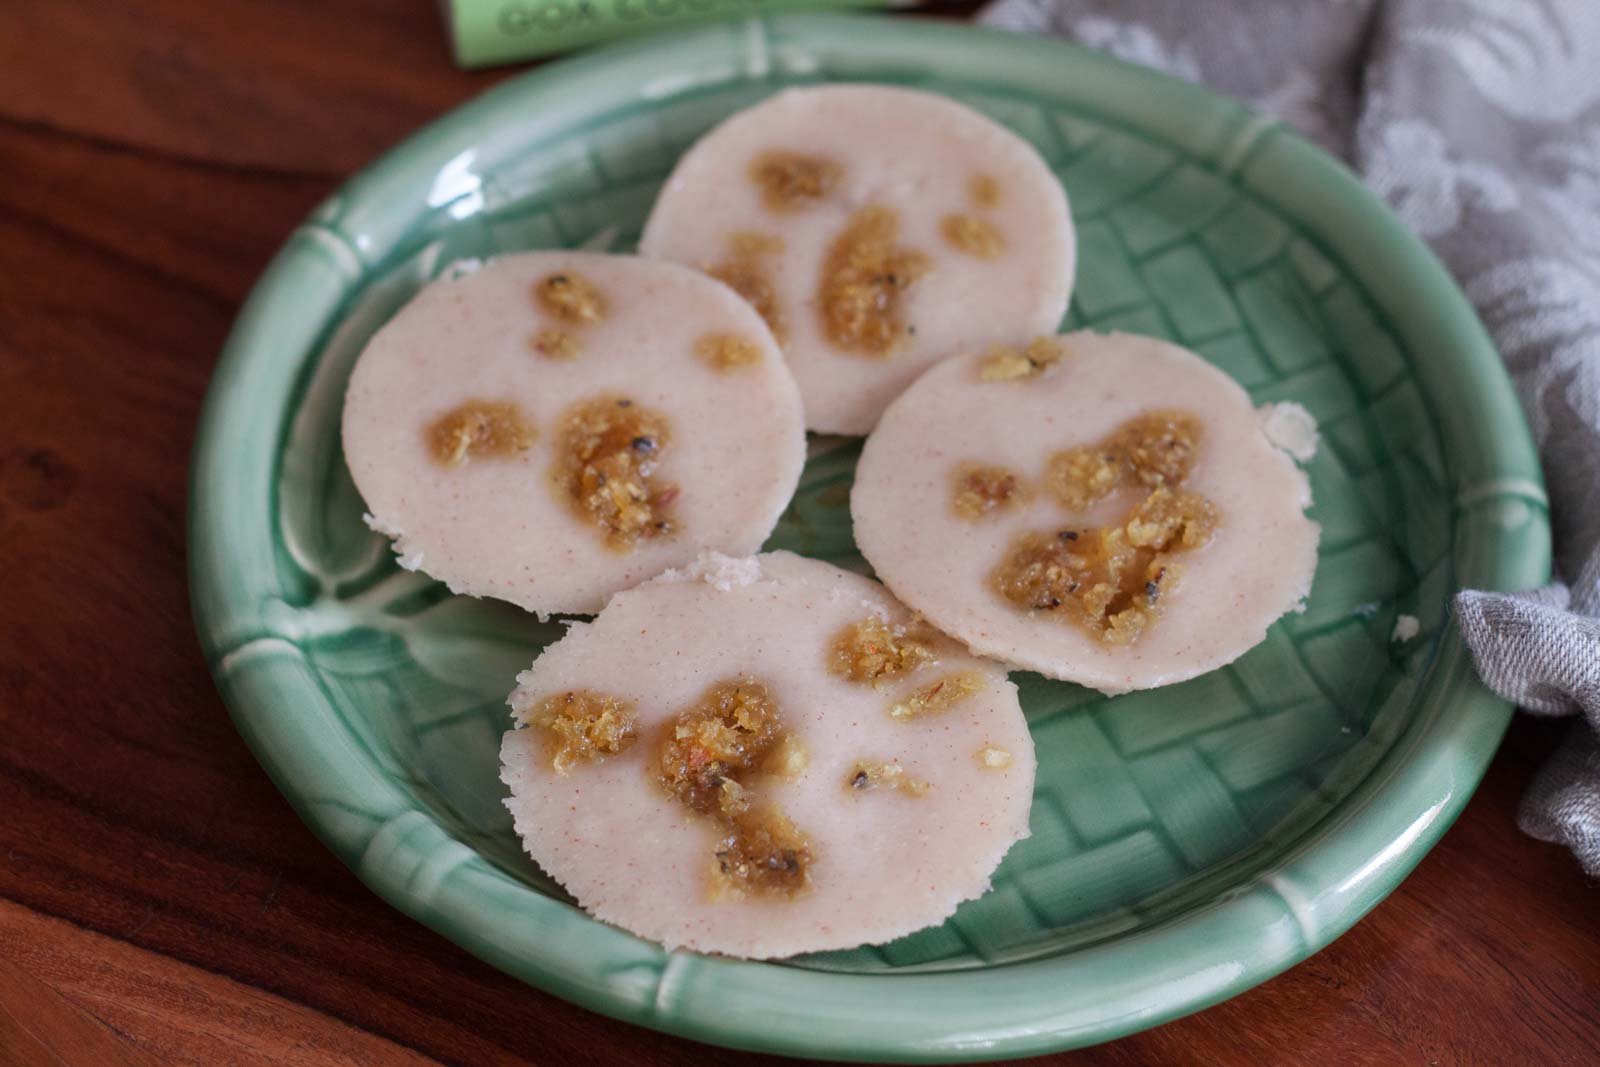 Goan Style Sando Recipe (Steamed Rice Cakes Filled With Sweet Coconut)